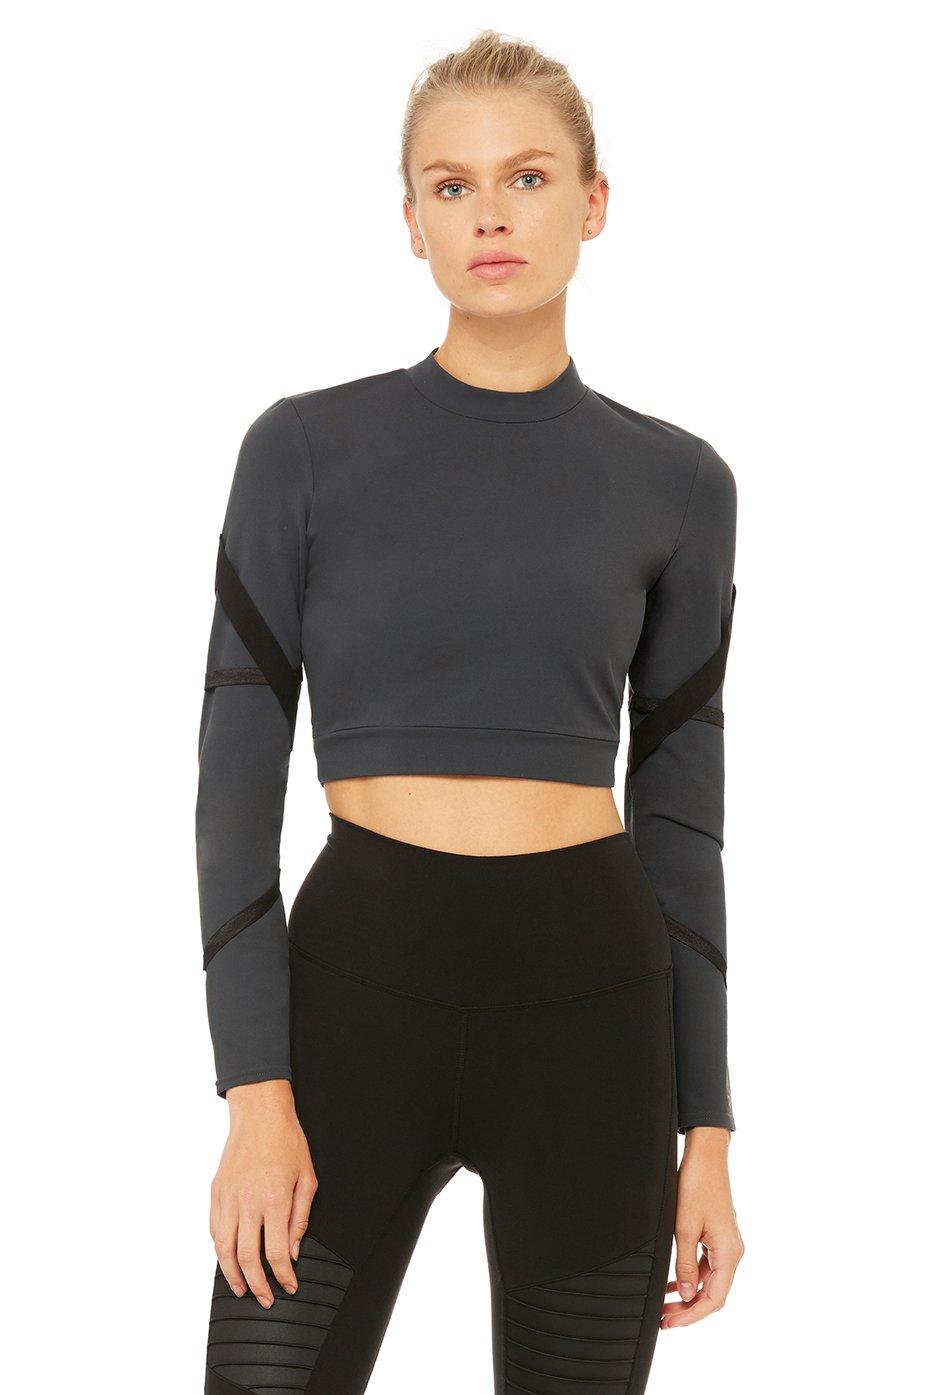 Alo Yoga ® Bandage Long Sleeve Top in Anthracite/Black (Gray) - Lyst